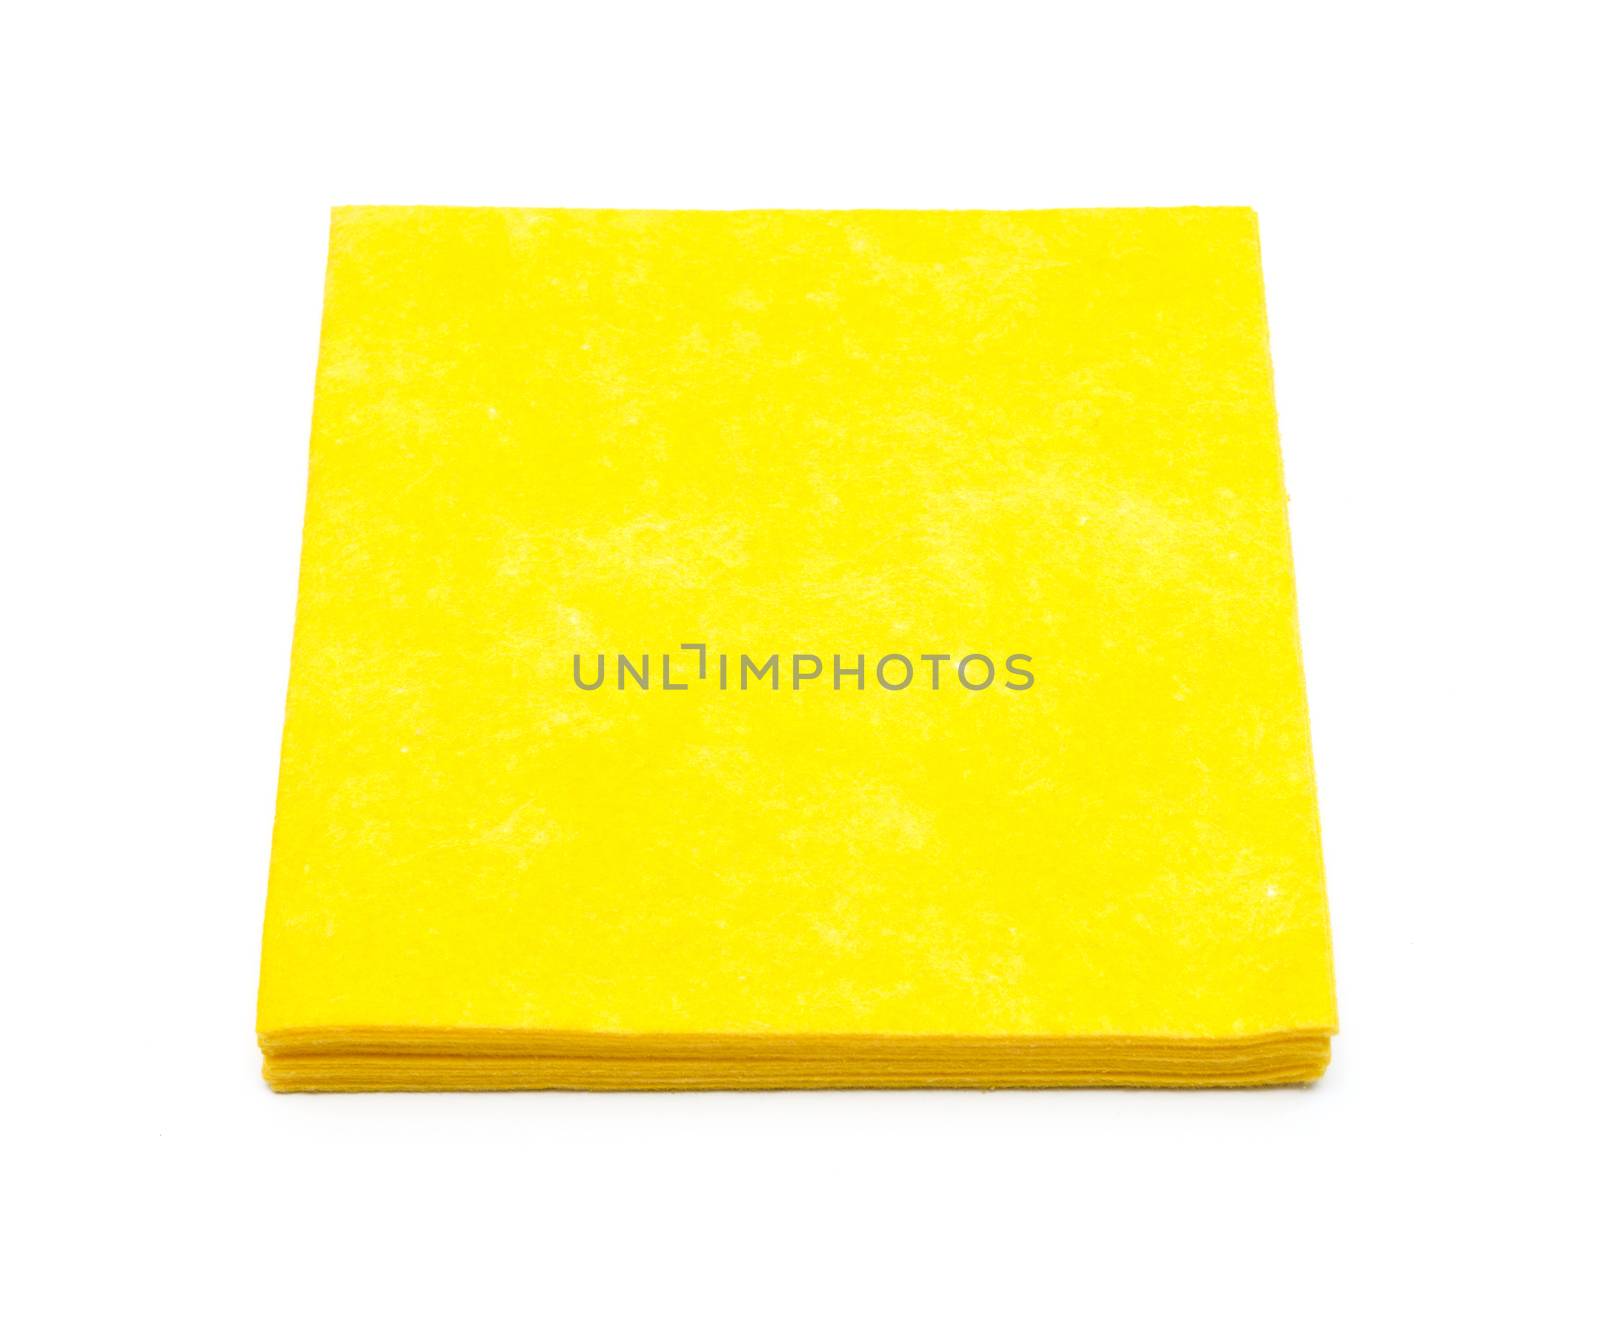 Yellow napkins for cleaning. On a white background